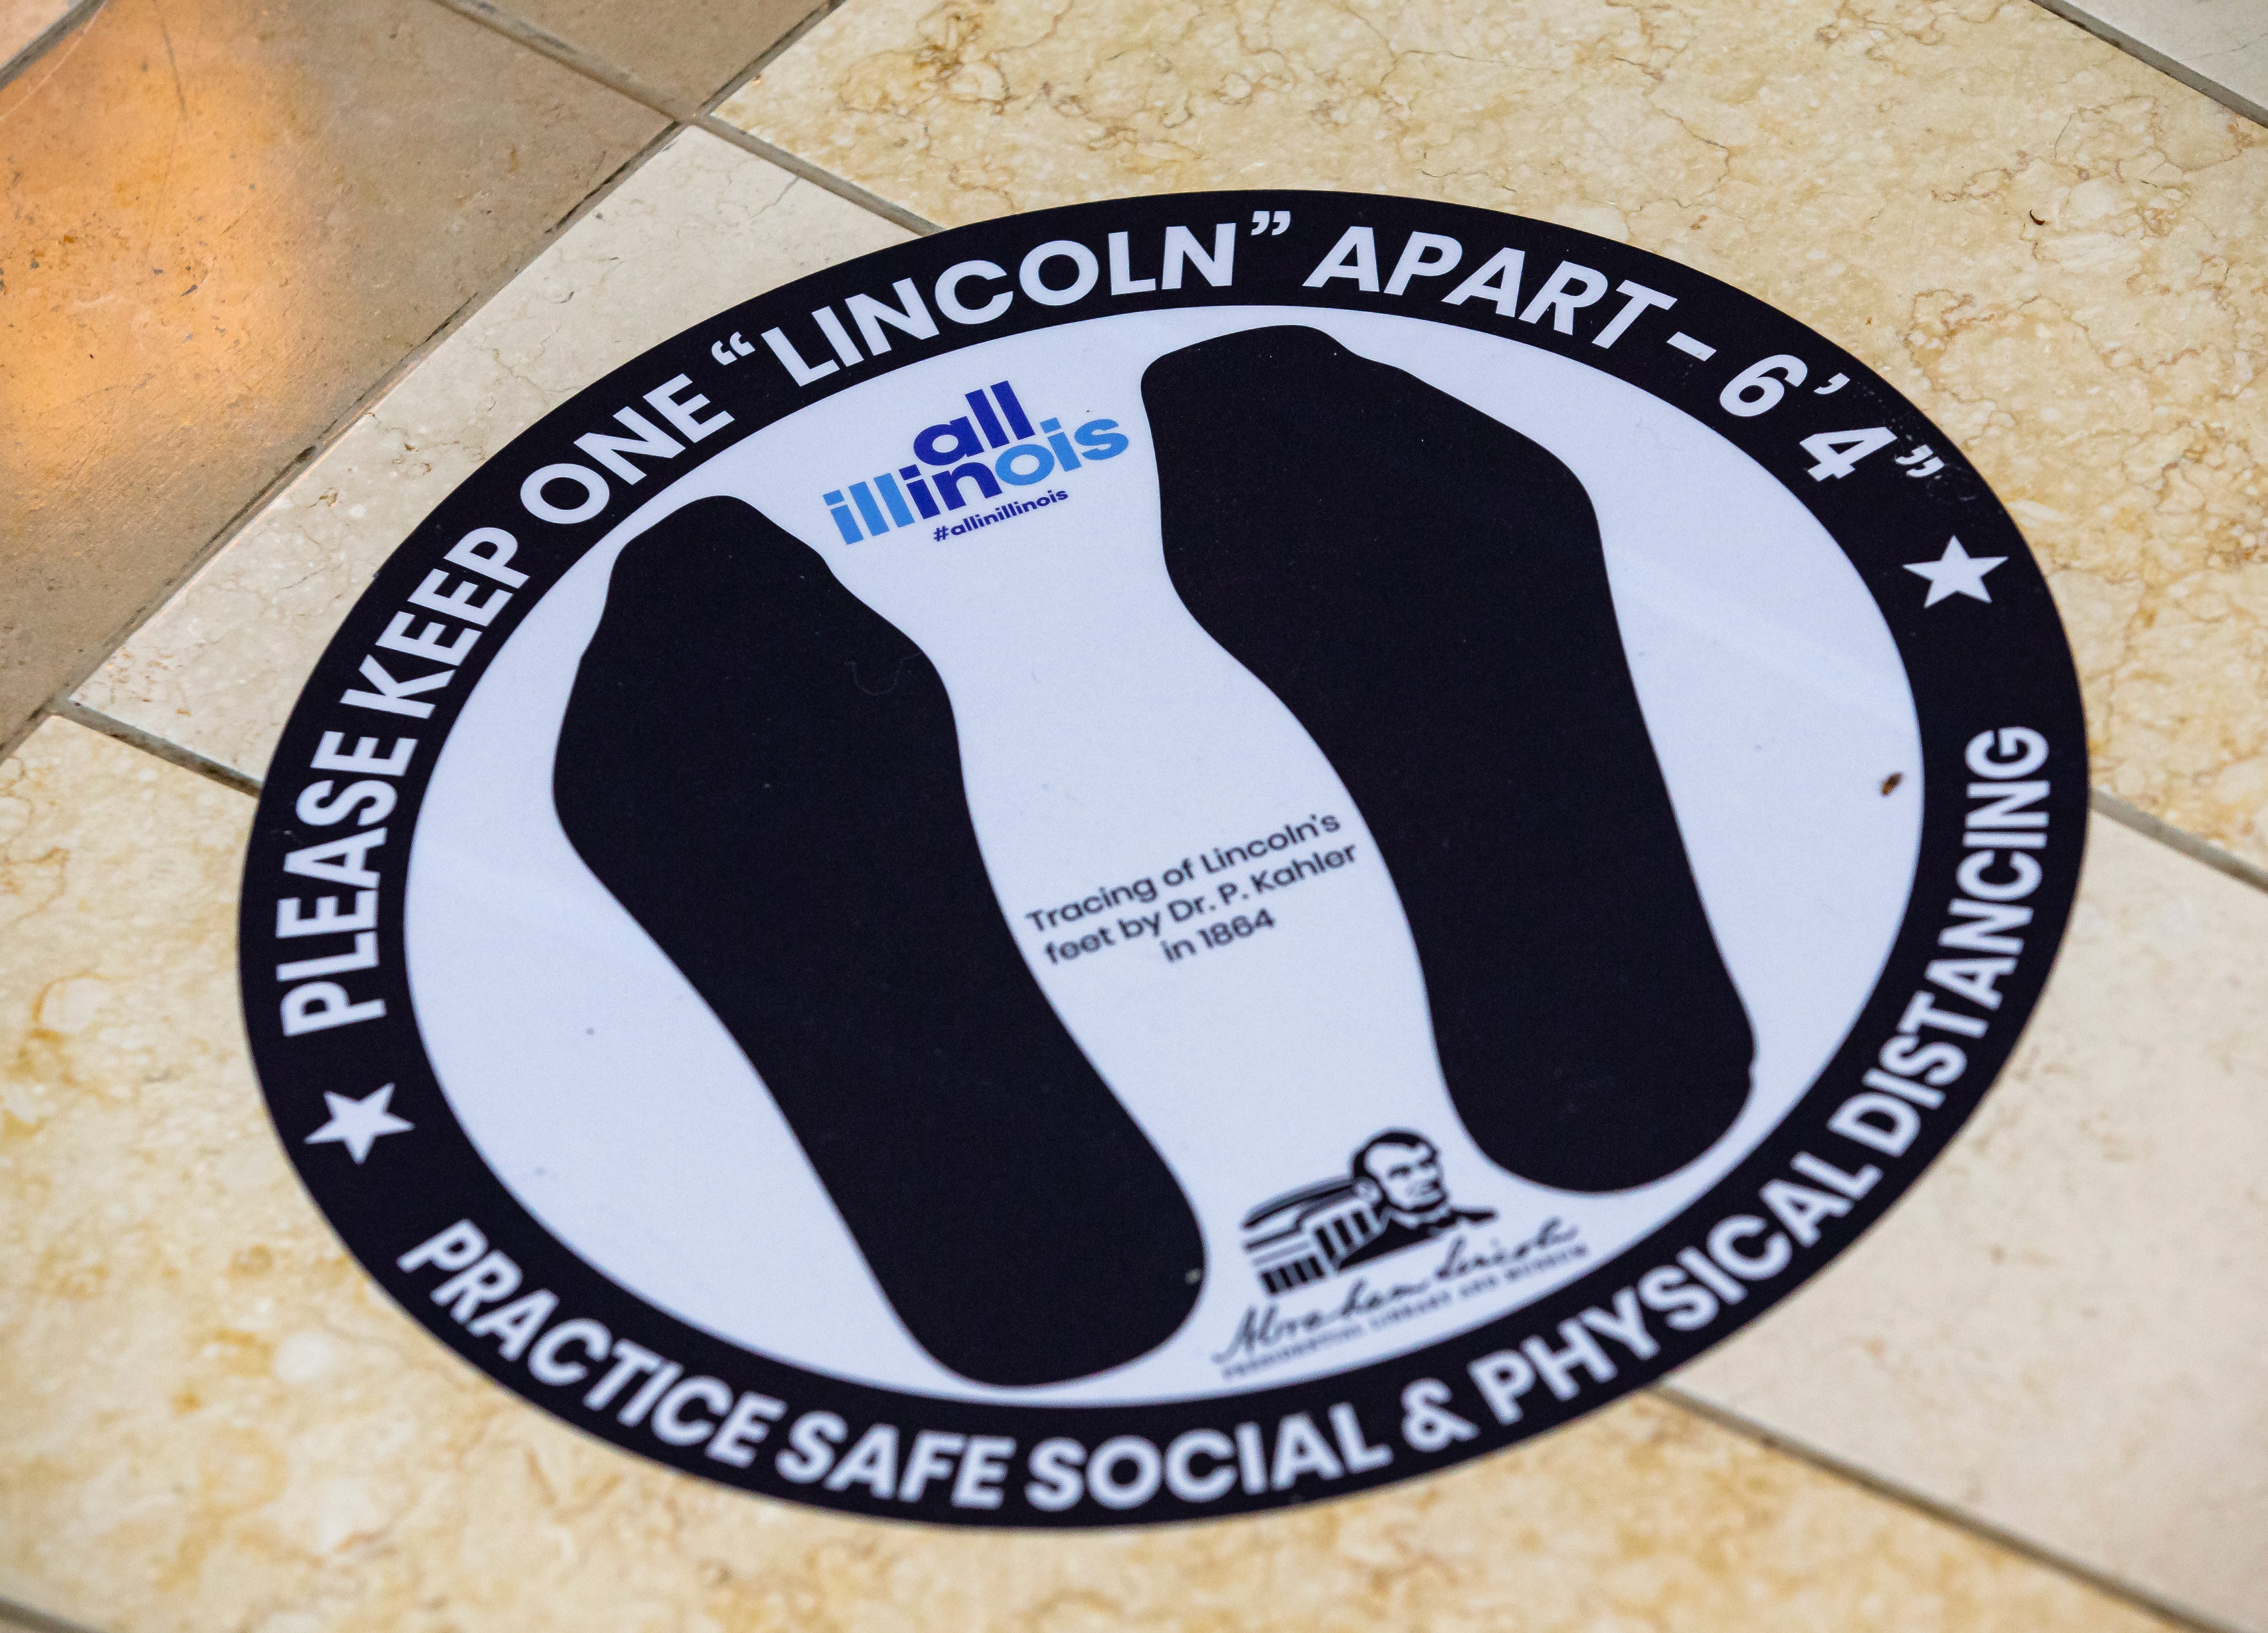 Signs along the floor encourage patrons to "Please Keep one Lincoln Apart - 6' 4" in a reference to Abraham Lincoln's height, for safe social distancing as the Abraham Lincoln Presidential Museum got set to reopen to the public during the COVID-19 pandemic, Tuesday, June 30, 2020, in Springfield, Ill.